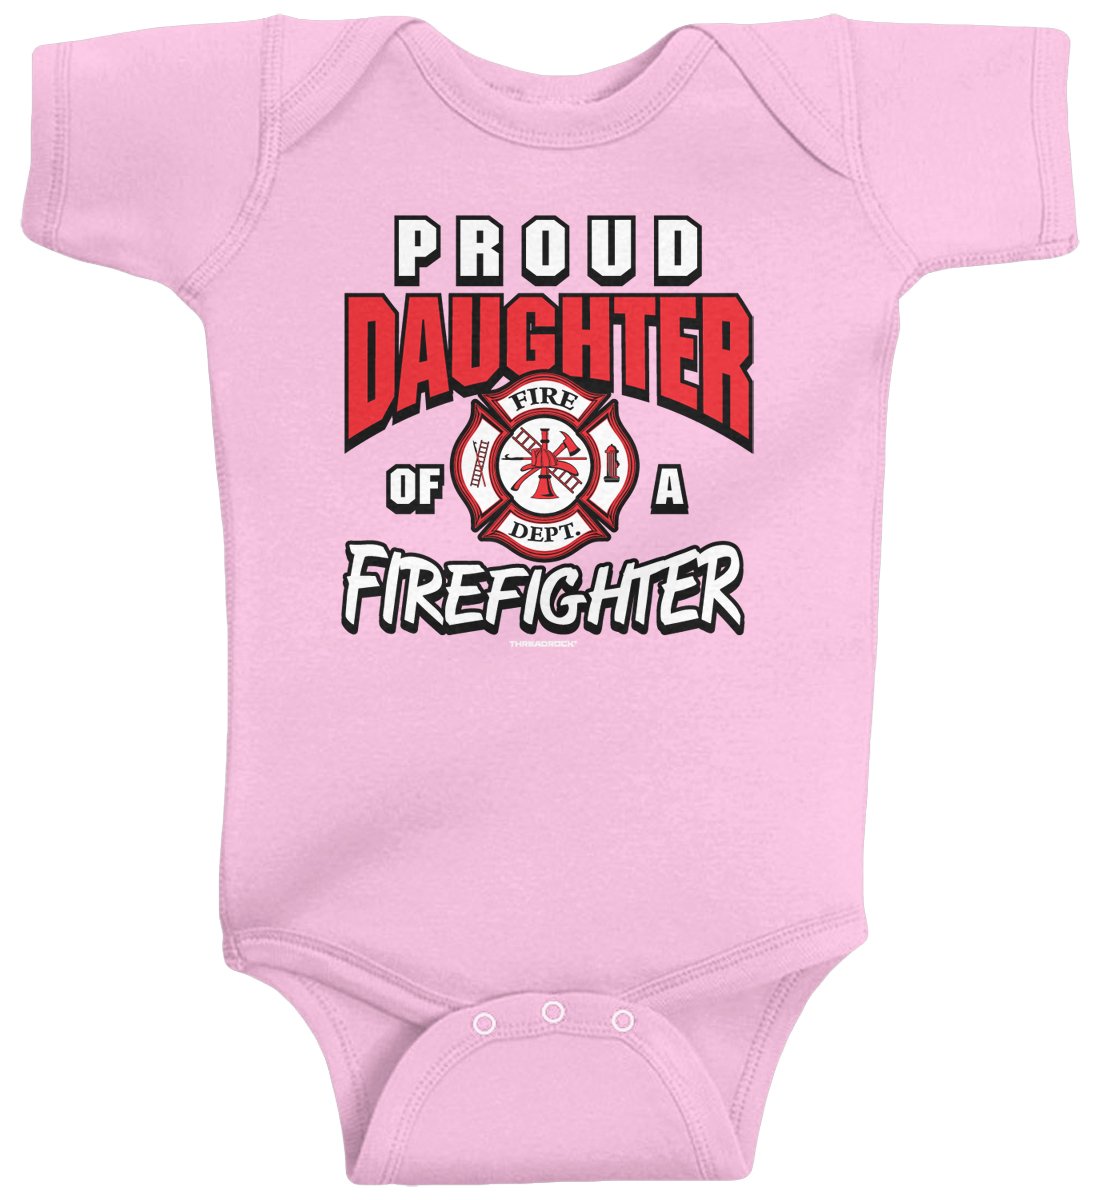 Threadrock Baby Girls' Proud Daughter of a Firefighter Infant Bodysuit